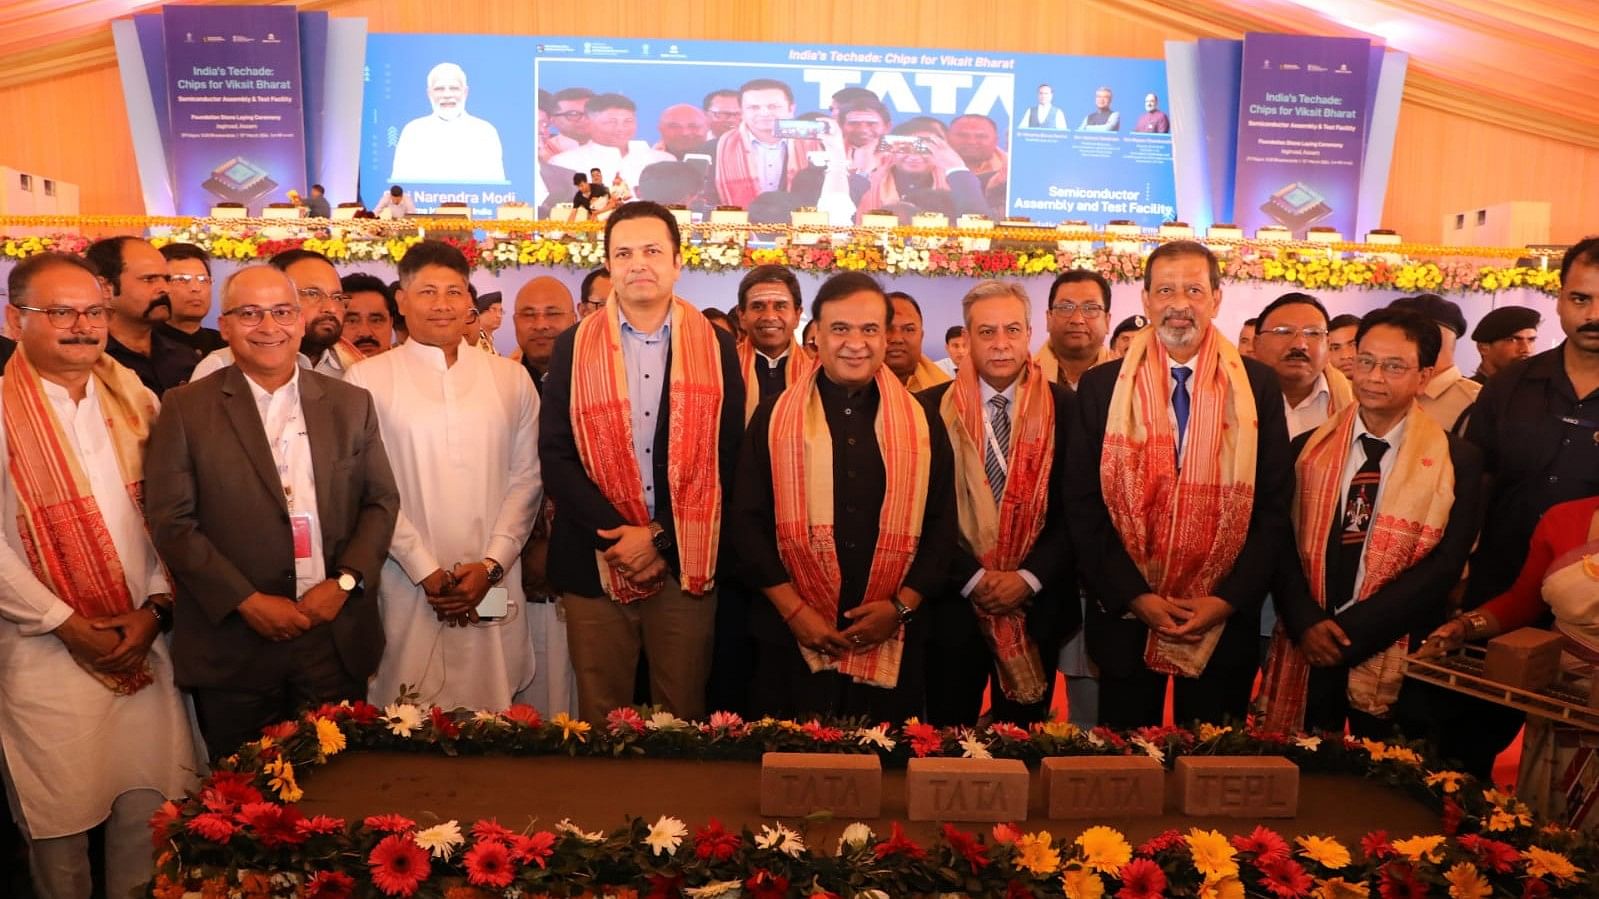 <div class="paragraphs"><p>Assam Chief Minister Himanta Biswa Sarma (C) and other executives and officials during the foundation stone laying ceremony for the Tata semiconductor plant.</p></div>